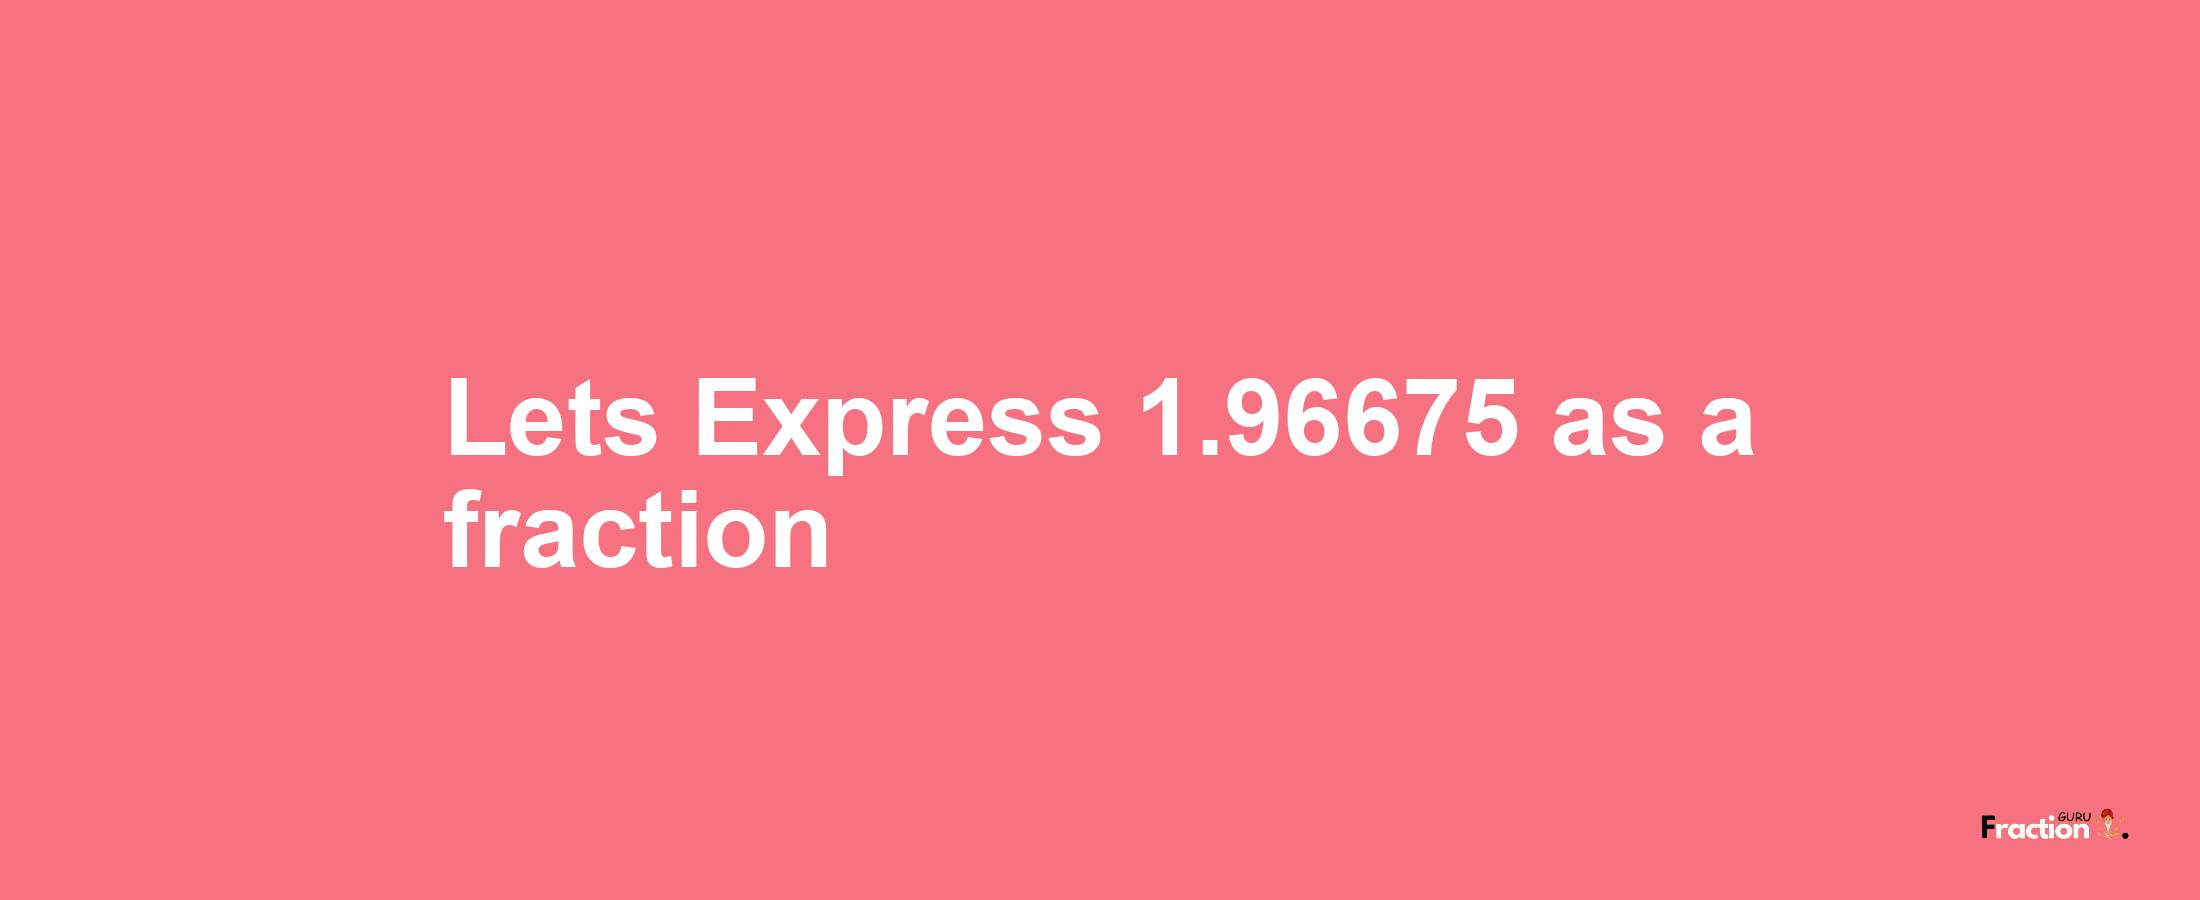 Lets Express 1.96675 as afraction